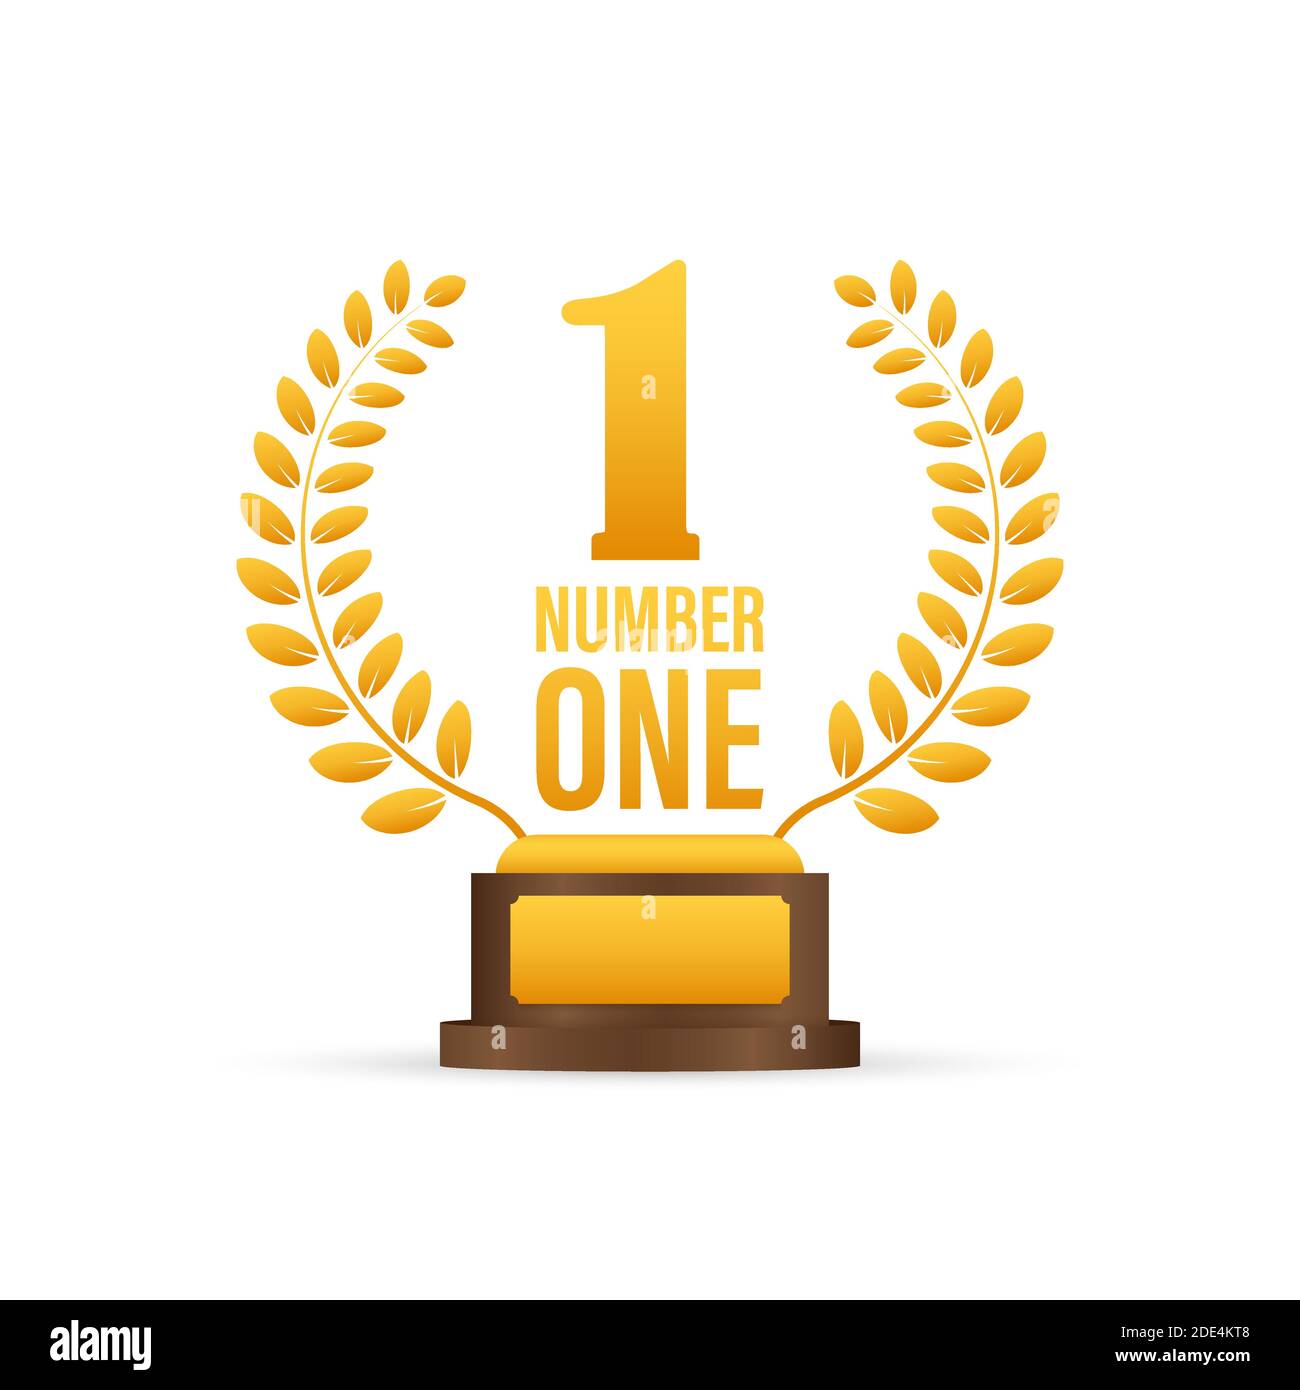 Number one for game design. Award ribbon gold icon number. Contest achievement. Winner banner. Vector stock illustration. Stock Vector